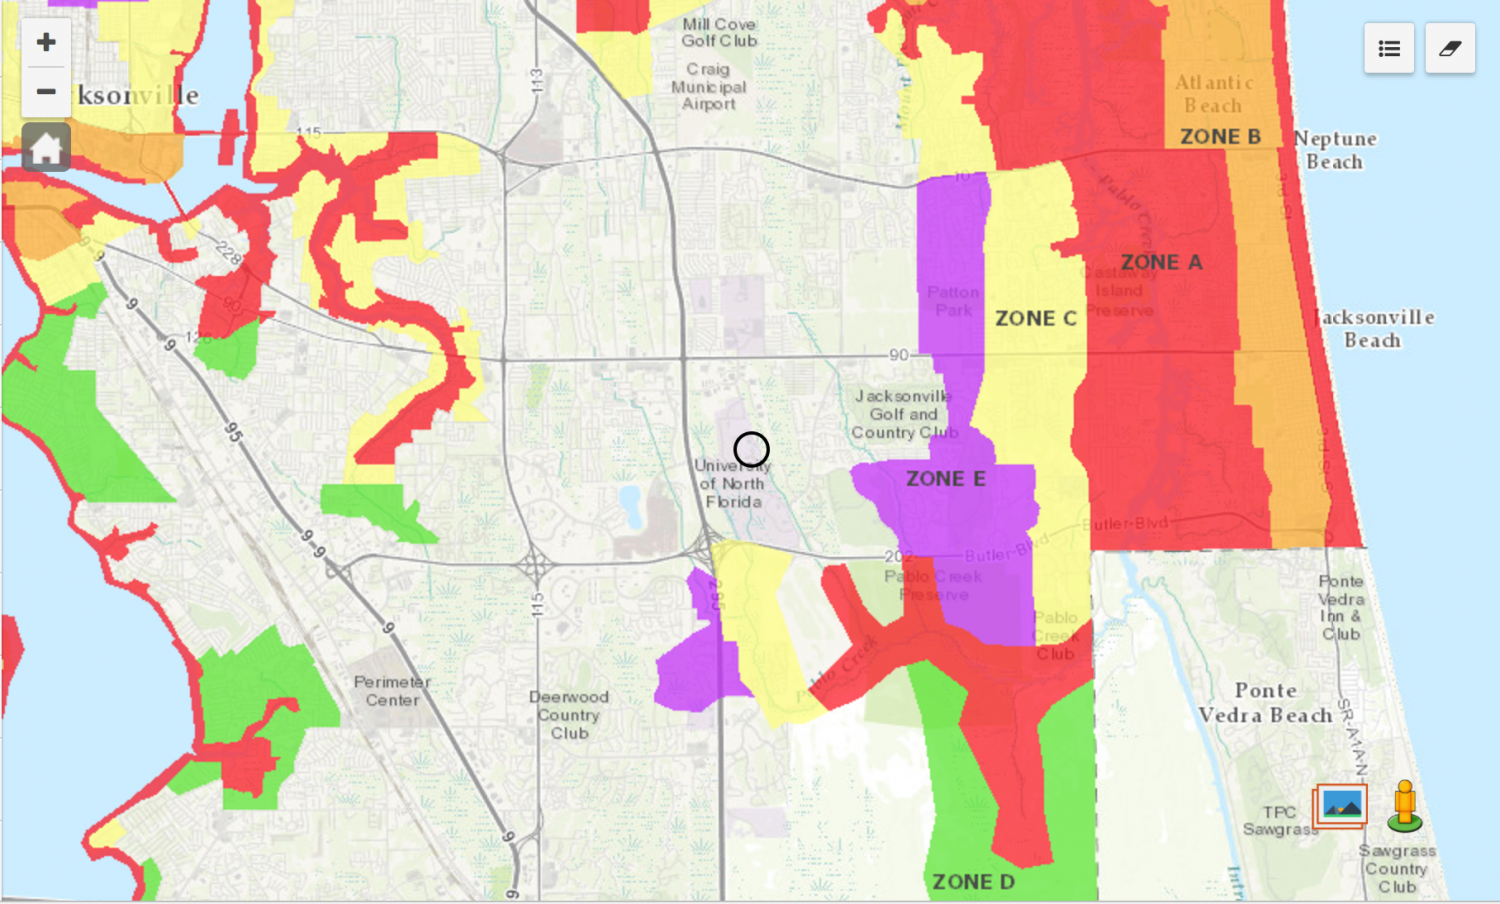 Flood Zone Map Duval County Maping Resources - Gambaran